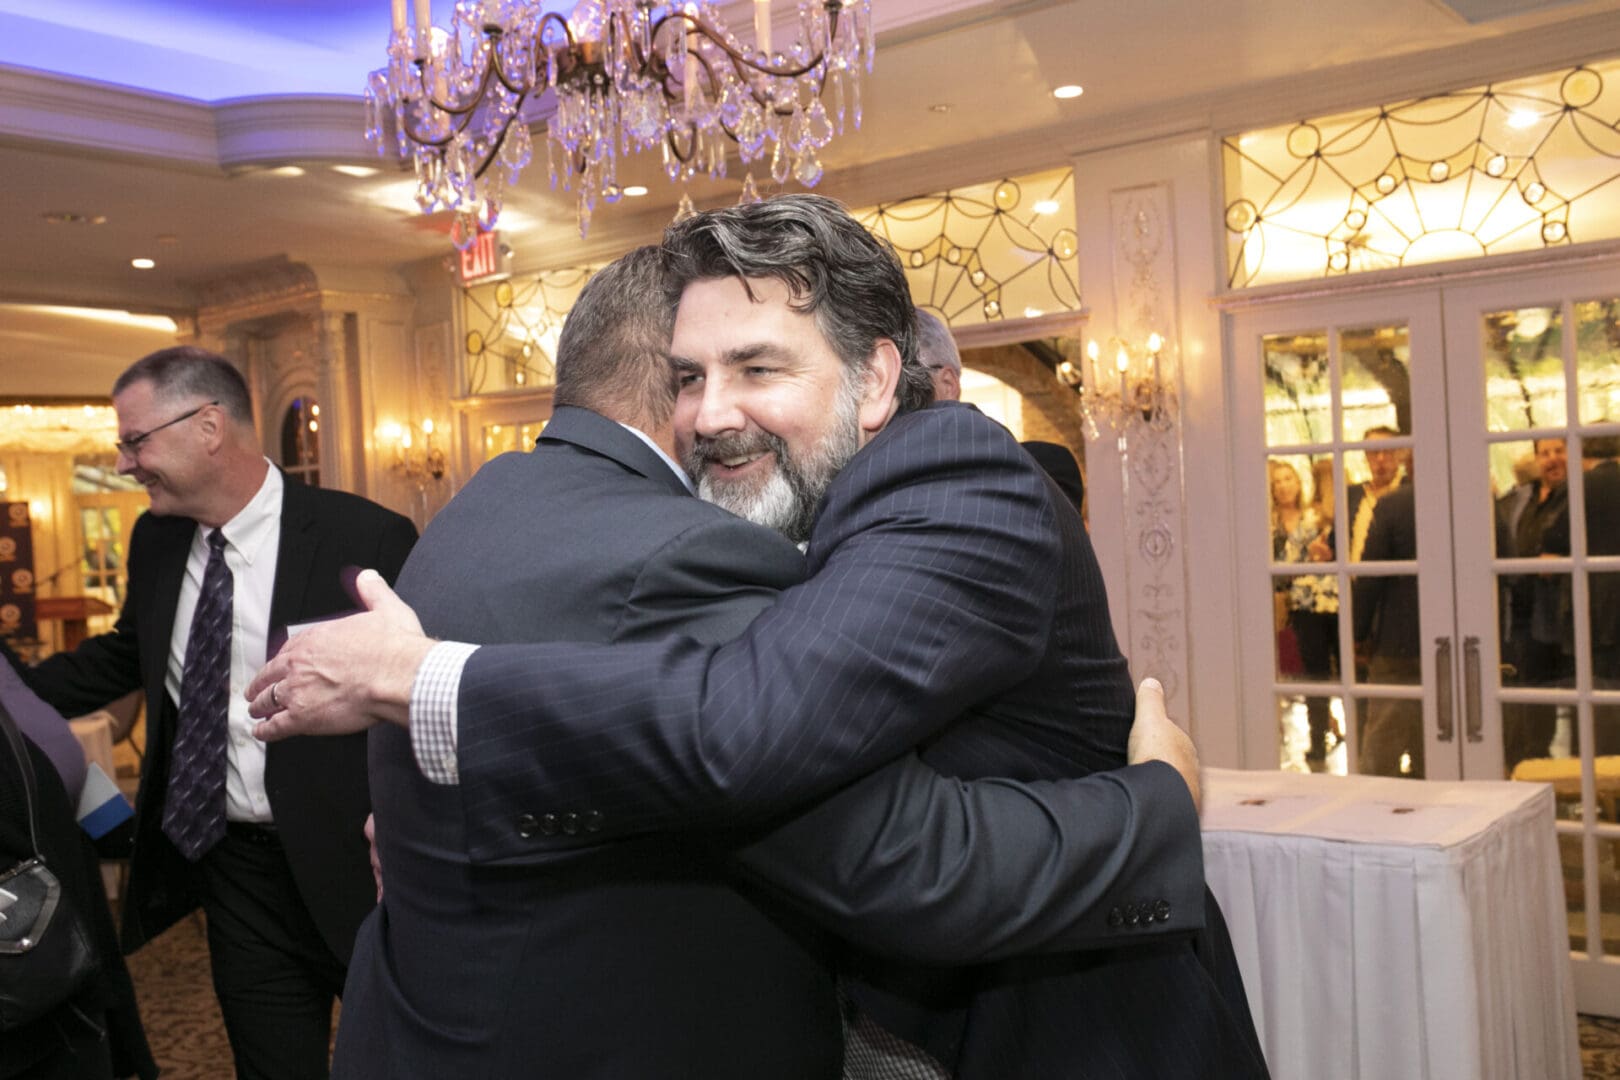 A man is hugging another man at a party.